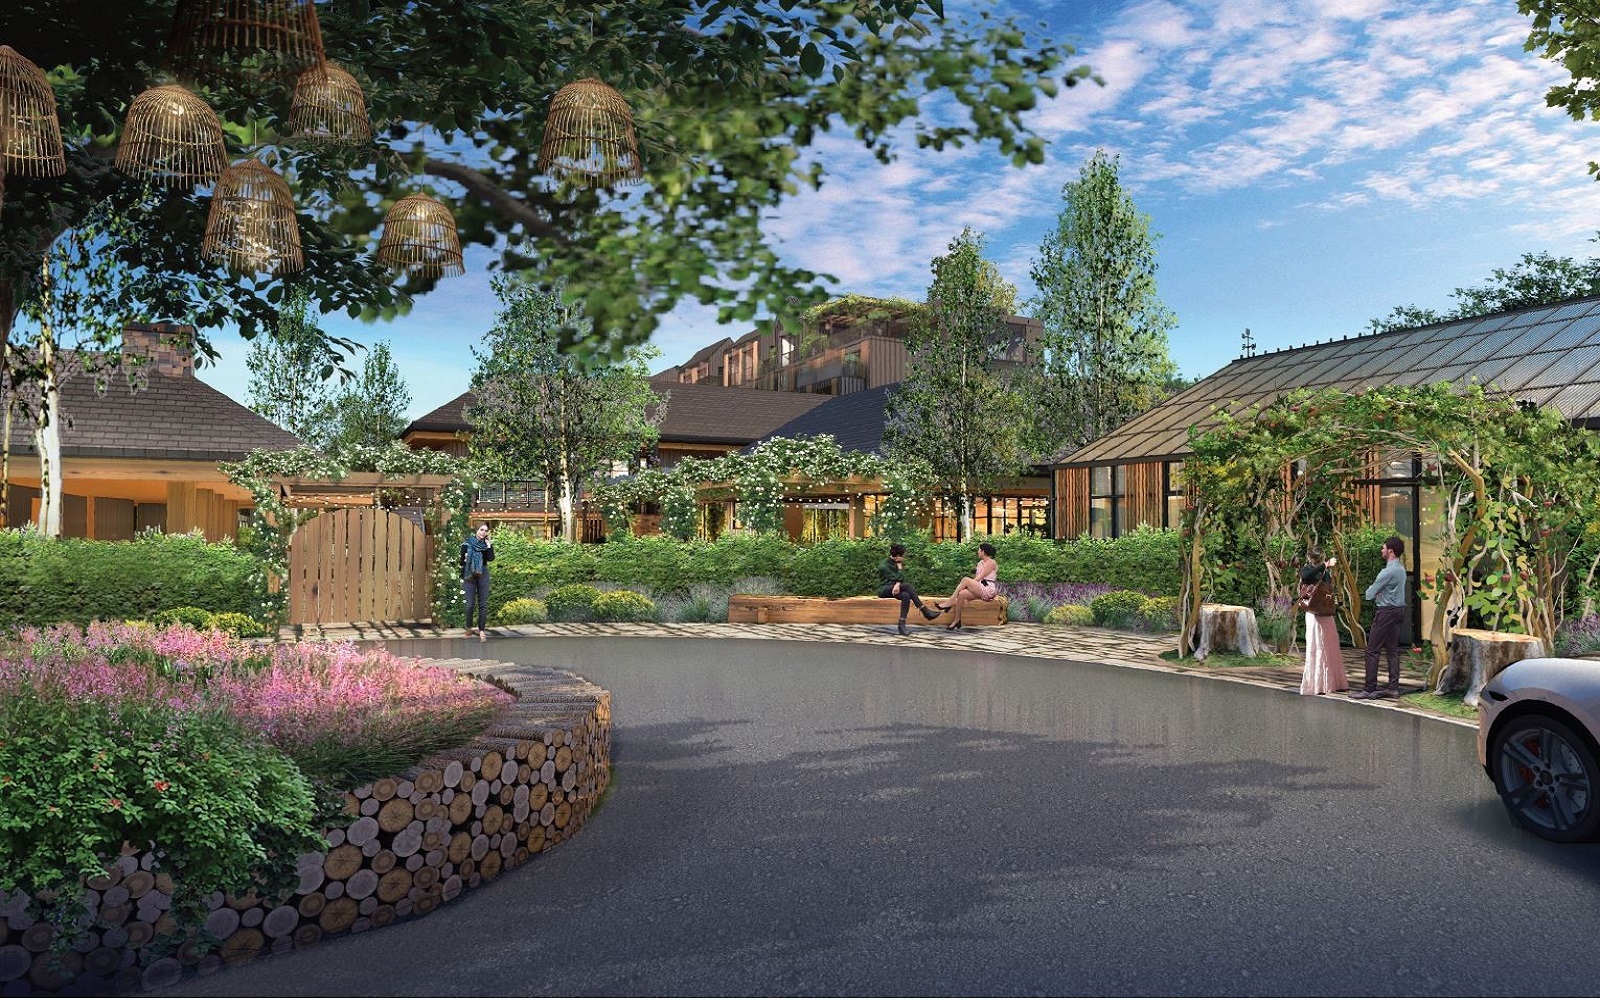 render of arrival courtyard at Treehouse Hotel California